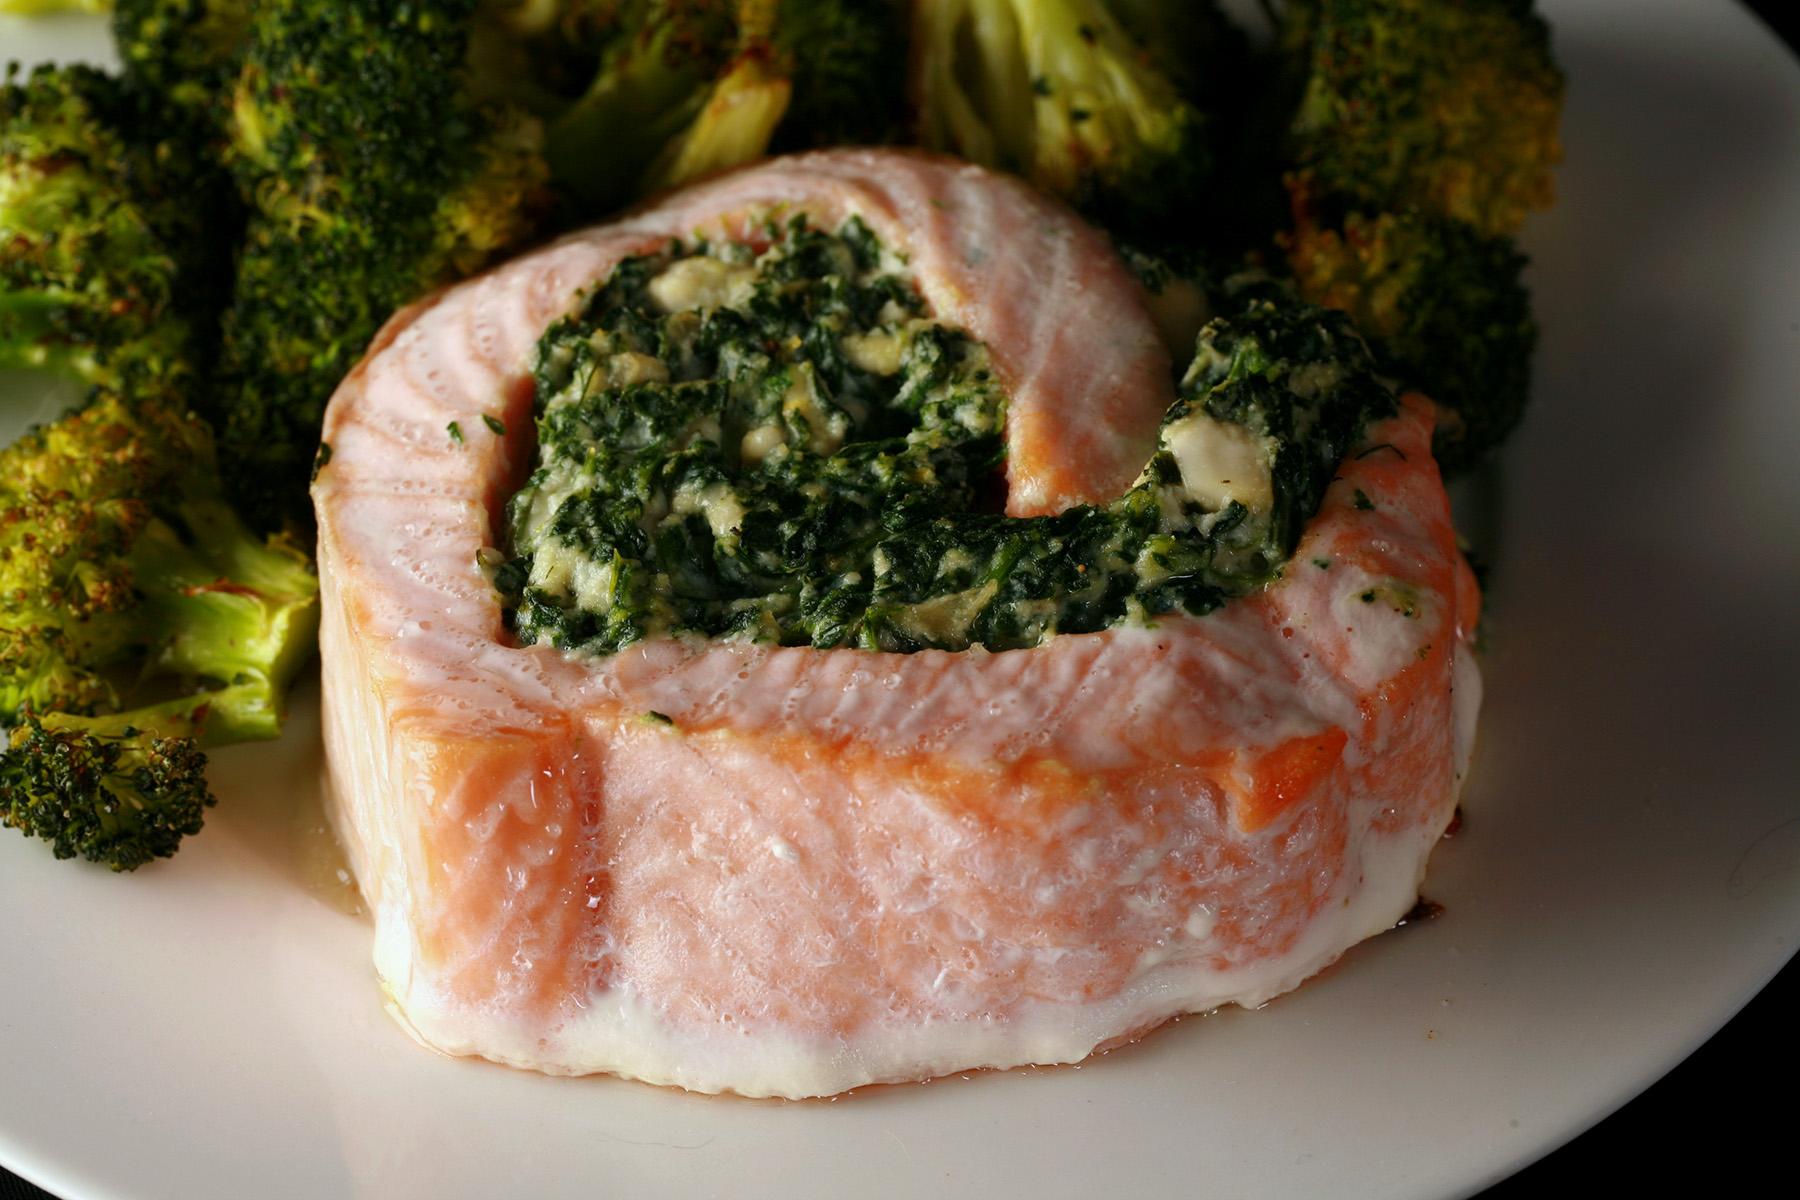 A serving of low carb spinach feta salmon pinwheels on a plate with some roasted broccoli.